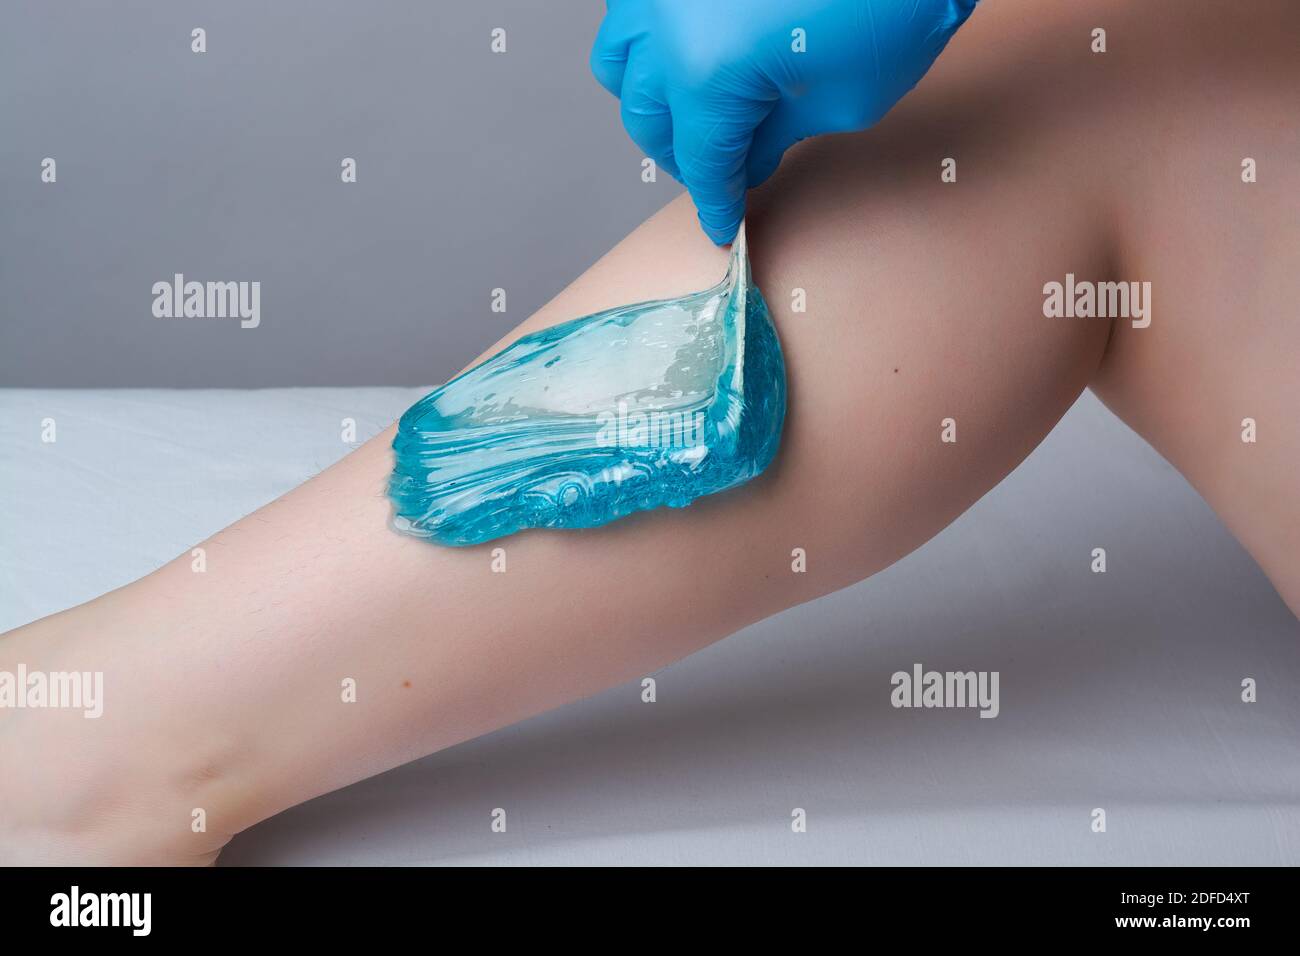 the procedure shugaring legs.the application of blue sugar paste.depilation in the salon Stock Photo